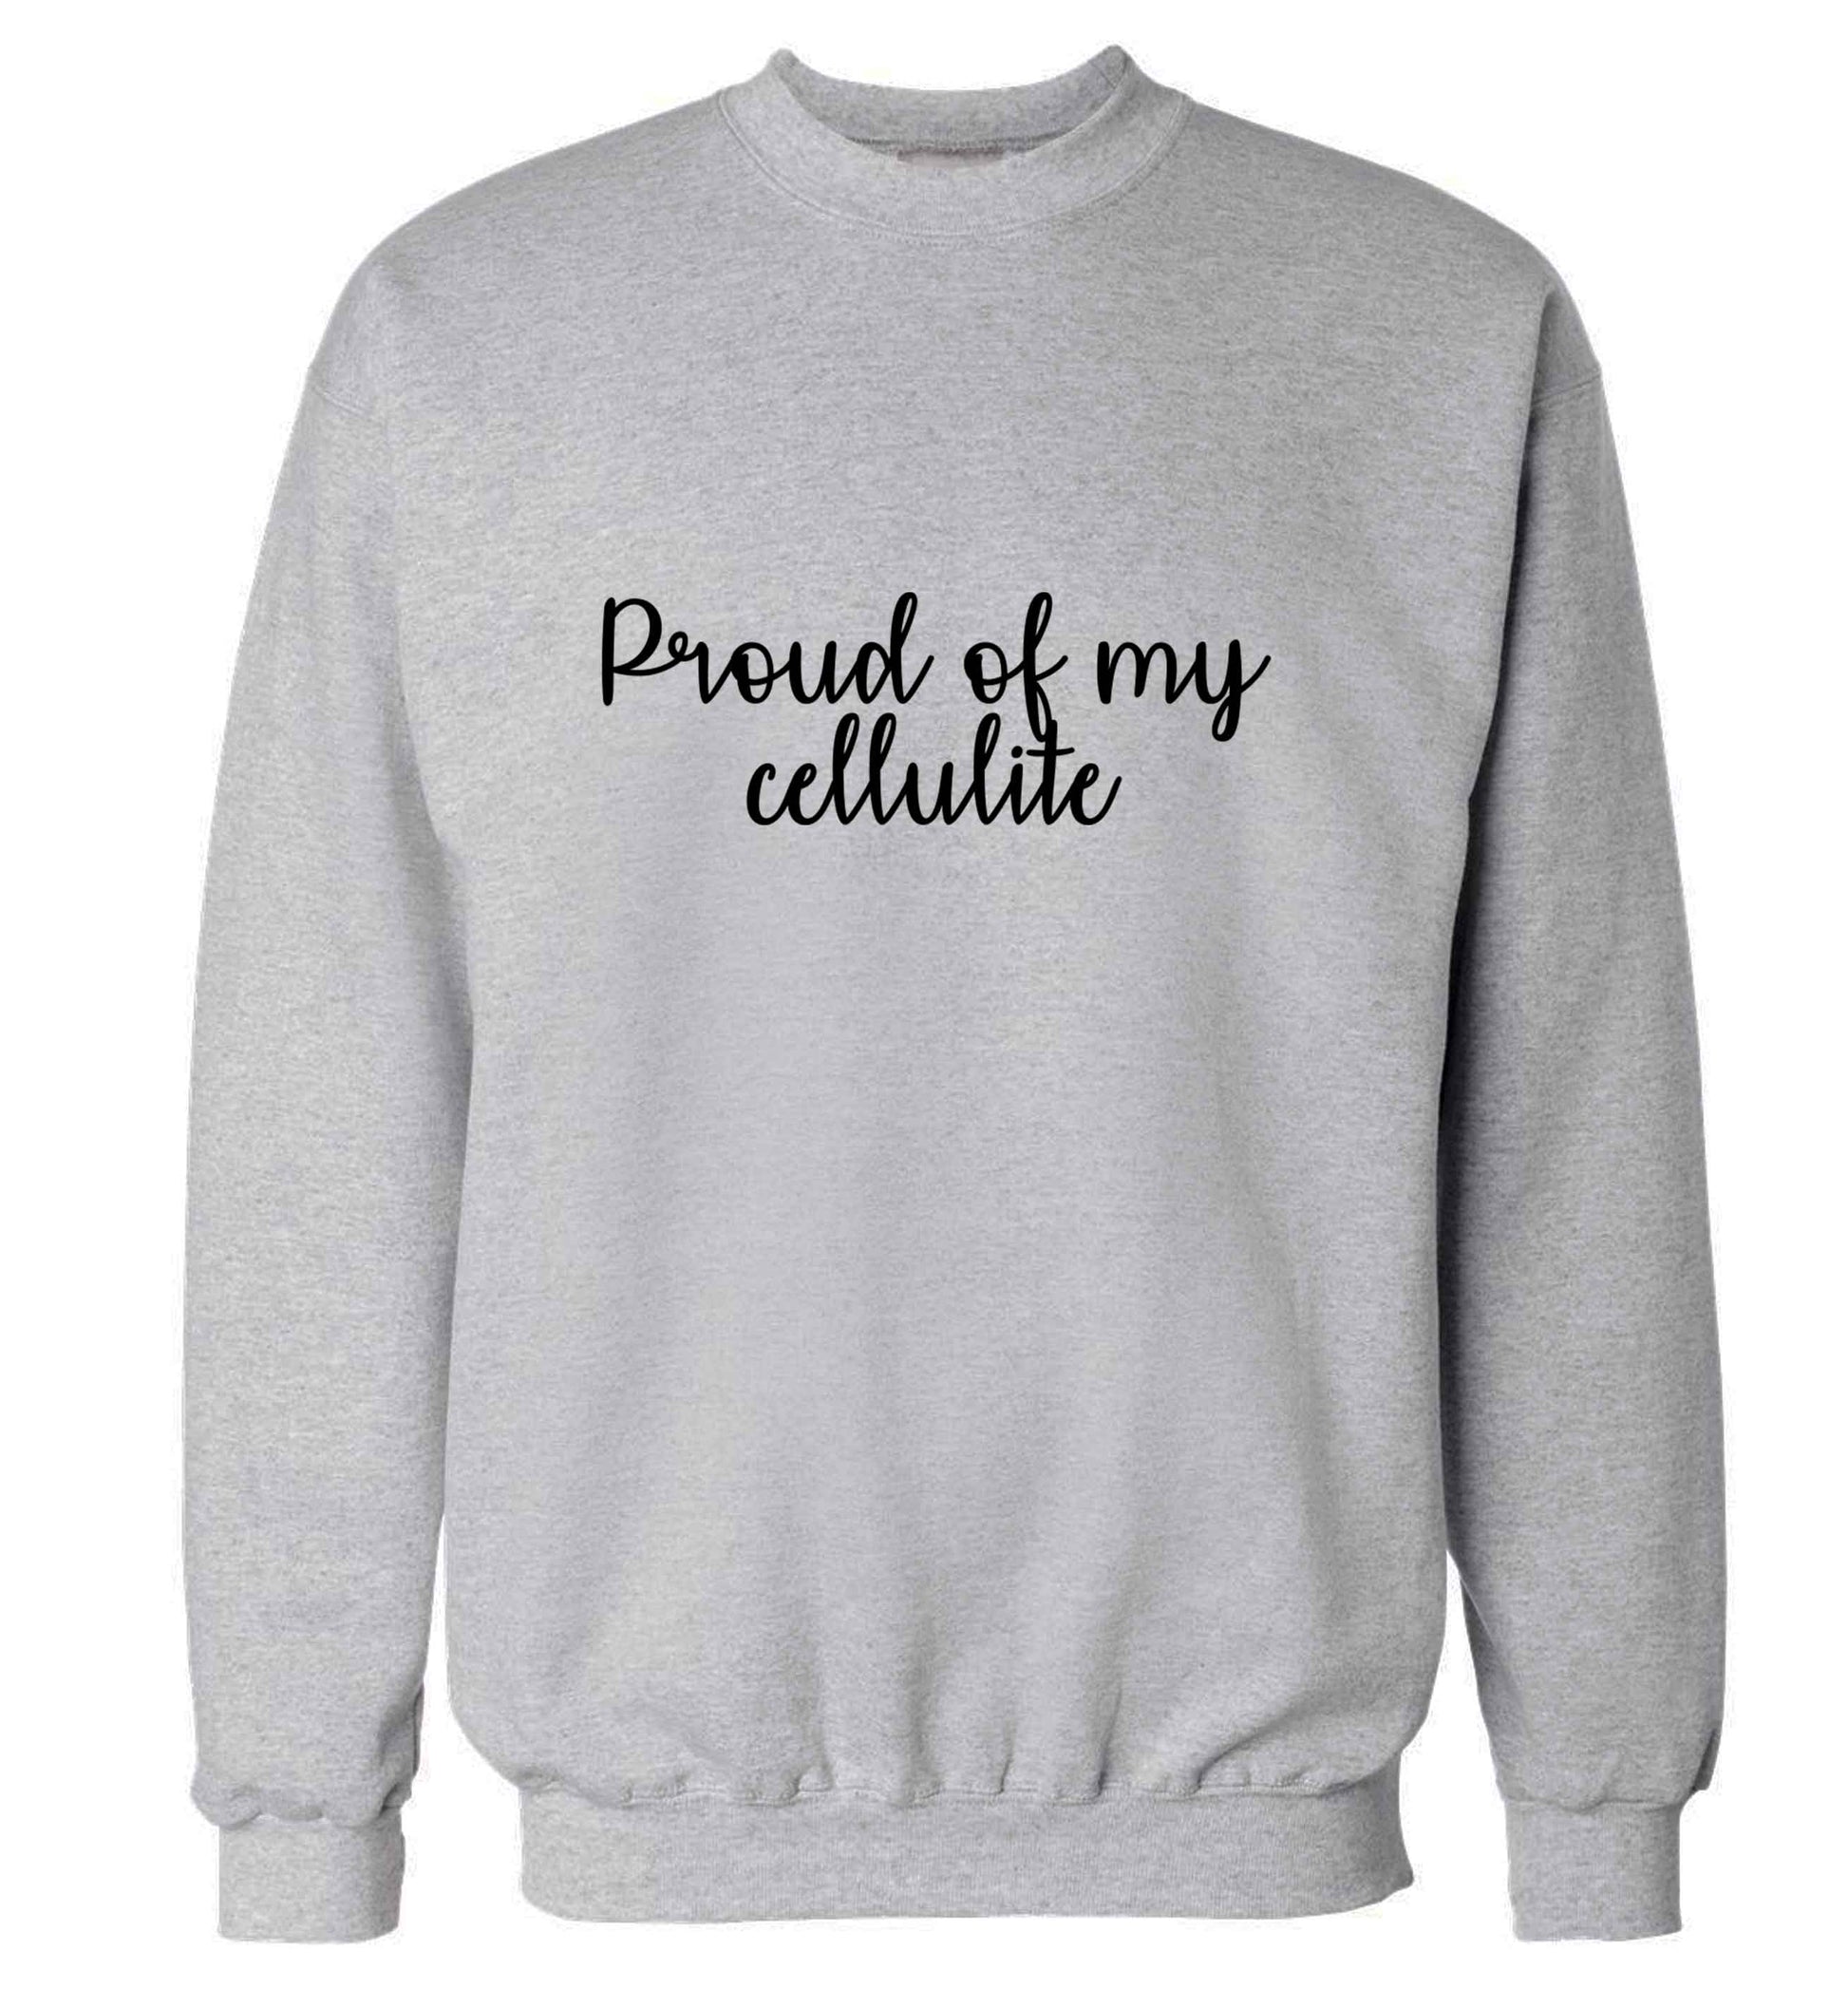 Proud of my cellulite adult's unisex grey sweater 2XL